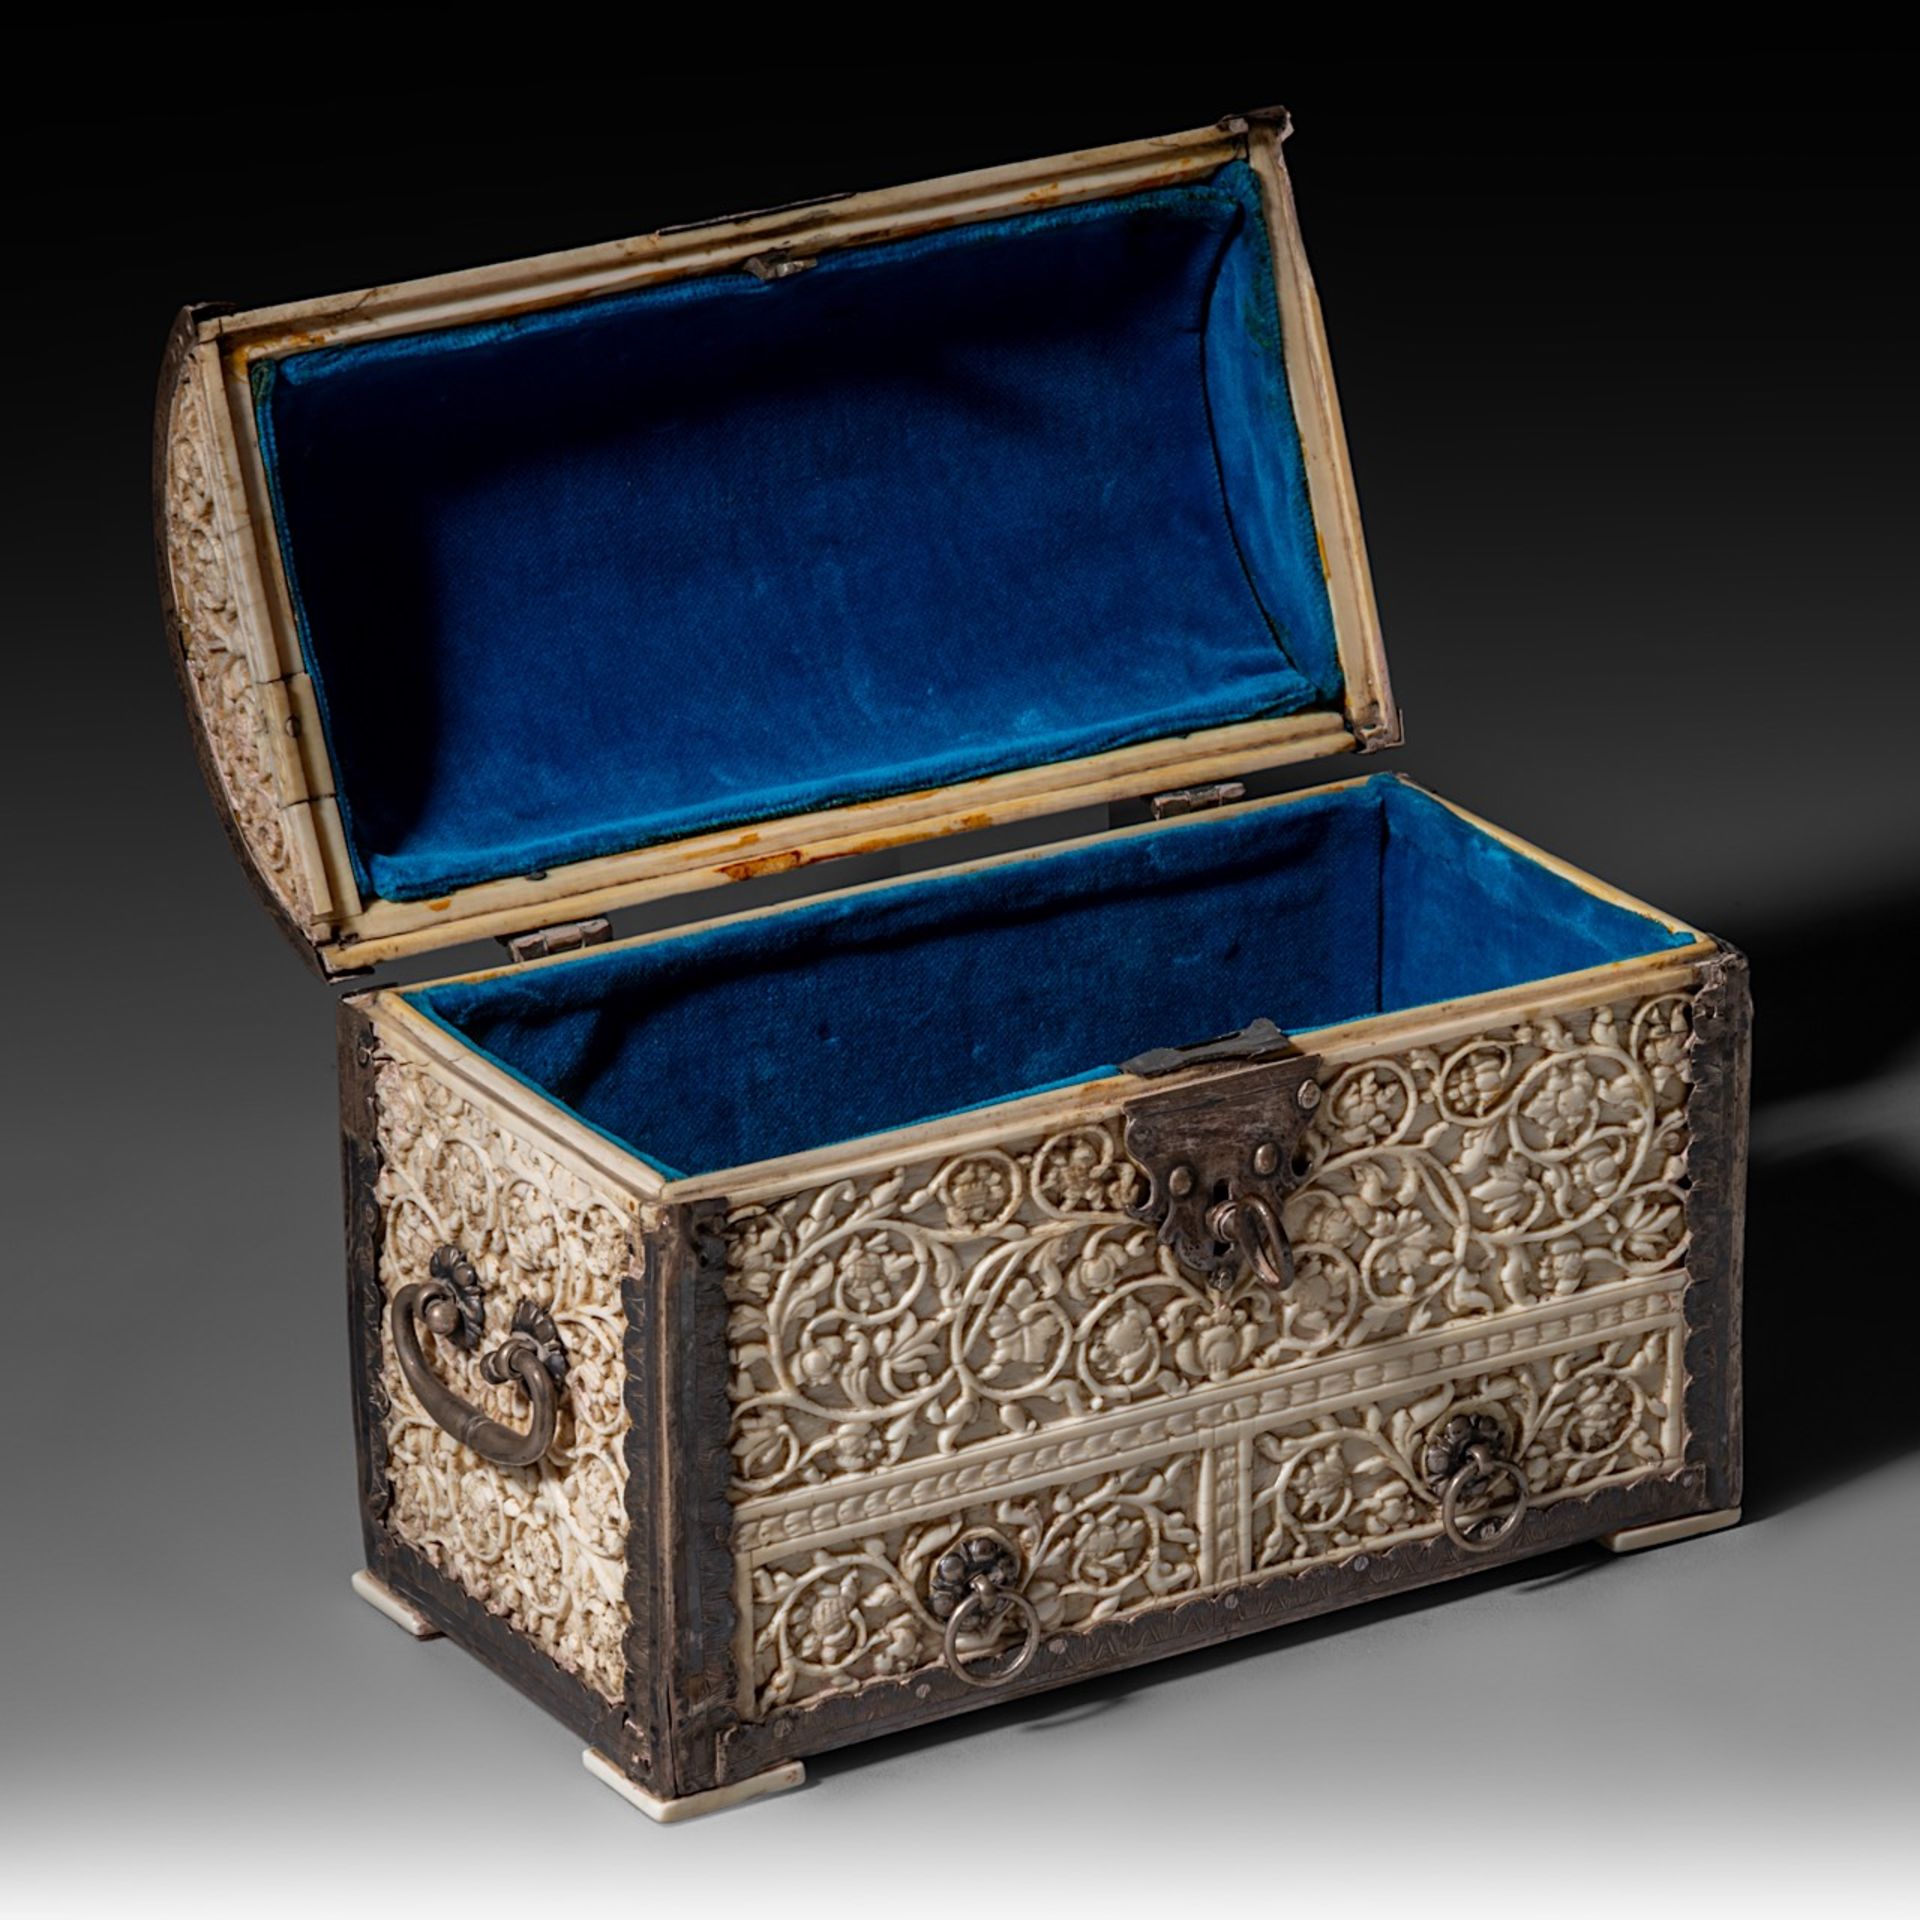 A 17th/18th-century Sinhalese (Sri Lanka) ivory jewelry casket, H 13,5 - W 19,3 - D 10,1 cm / total - Image 2 of 11